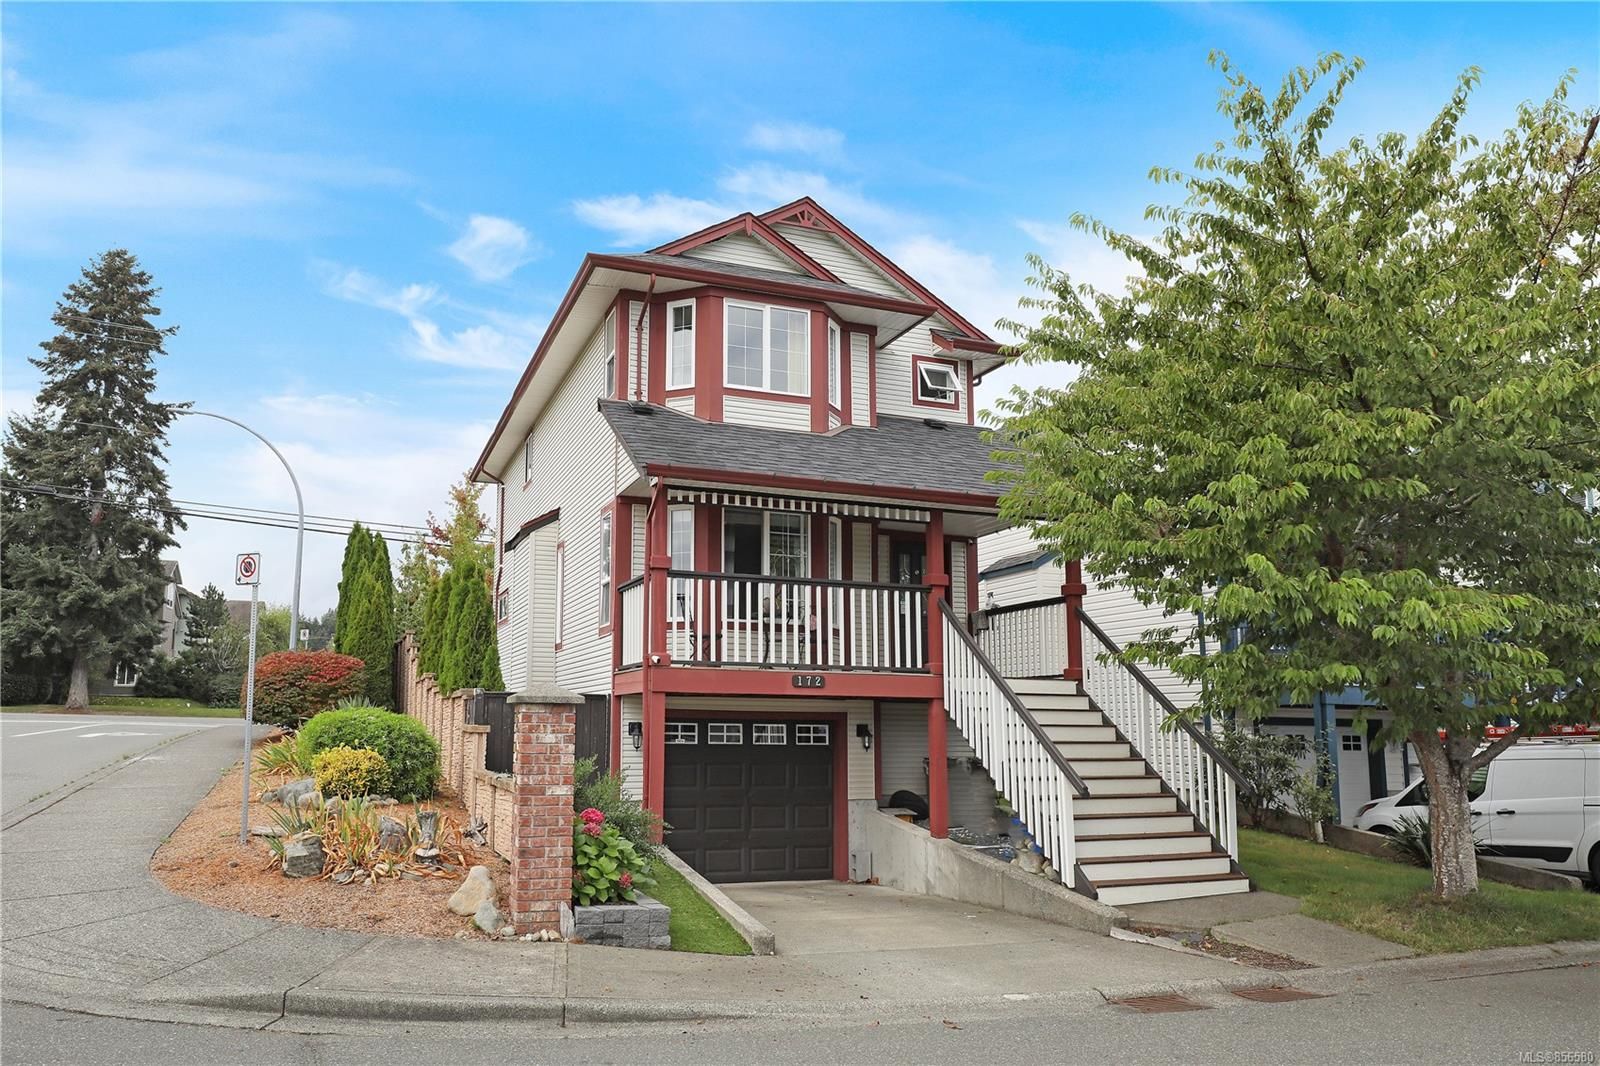 Main Photo: 172 202 31st St in Courtenay: CV Courtenay City House for sale (Comox Valley)  : MLS®# 856580